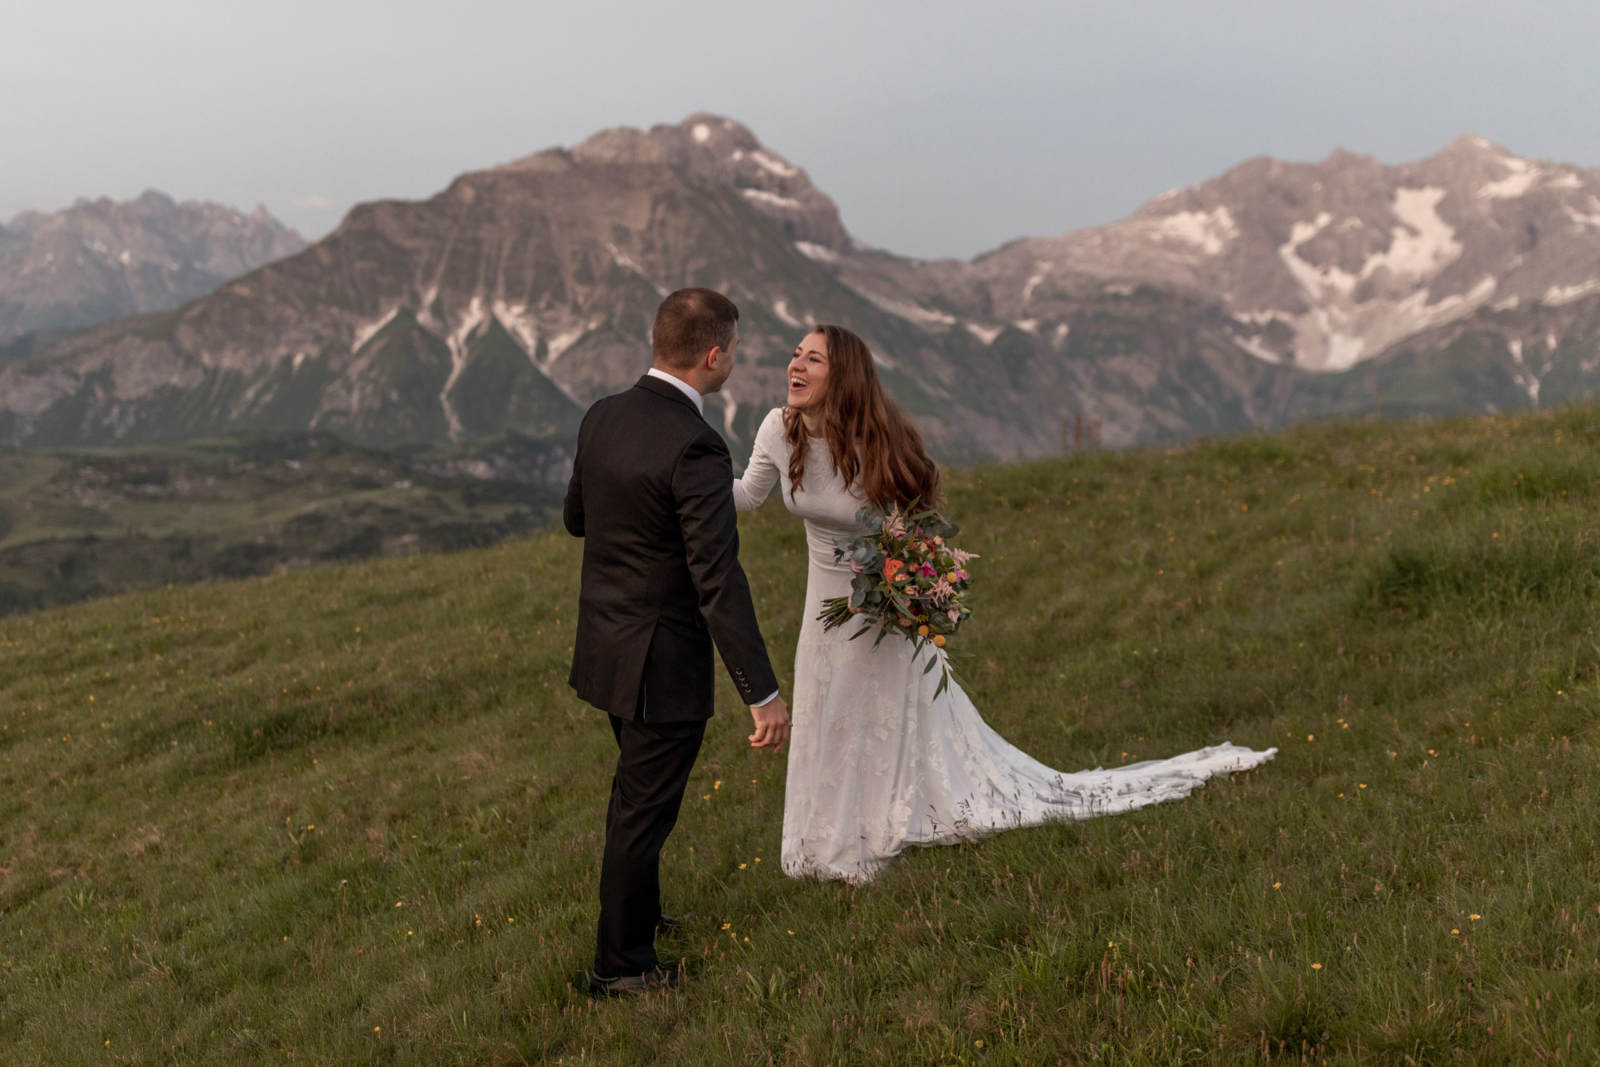 emotional moments before the elopement ceremony in the mountains